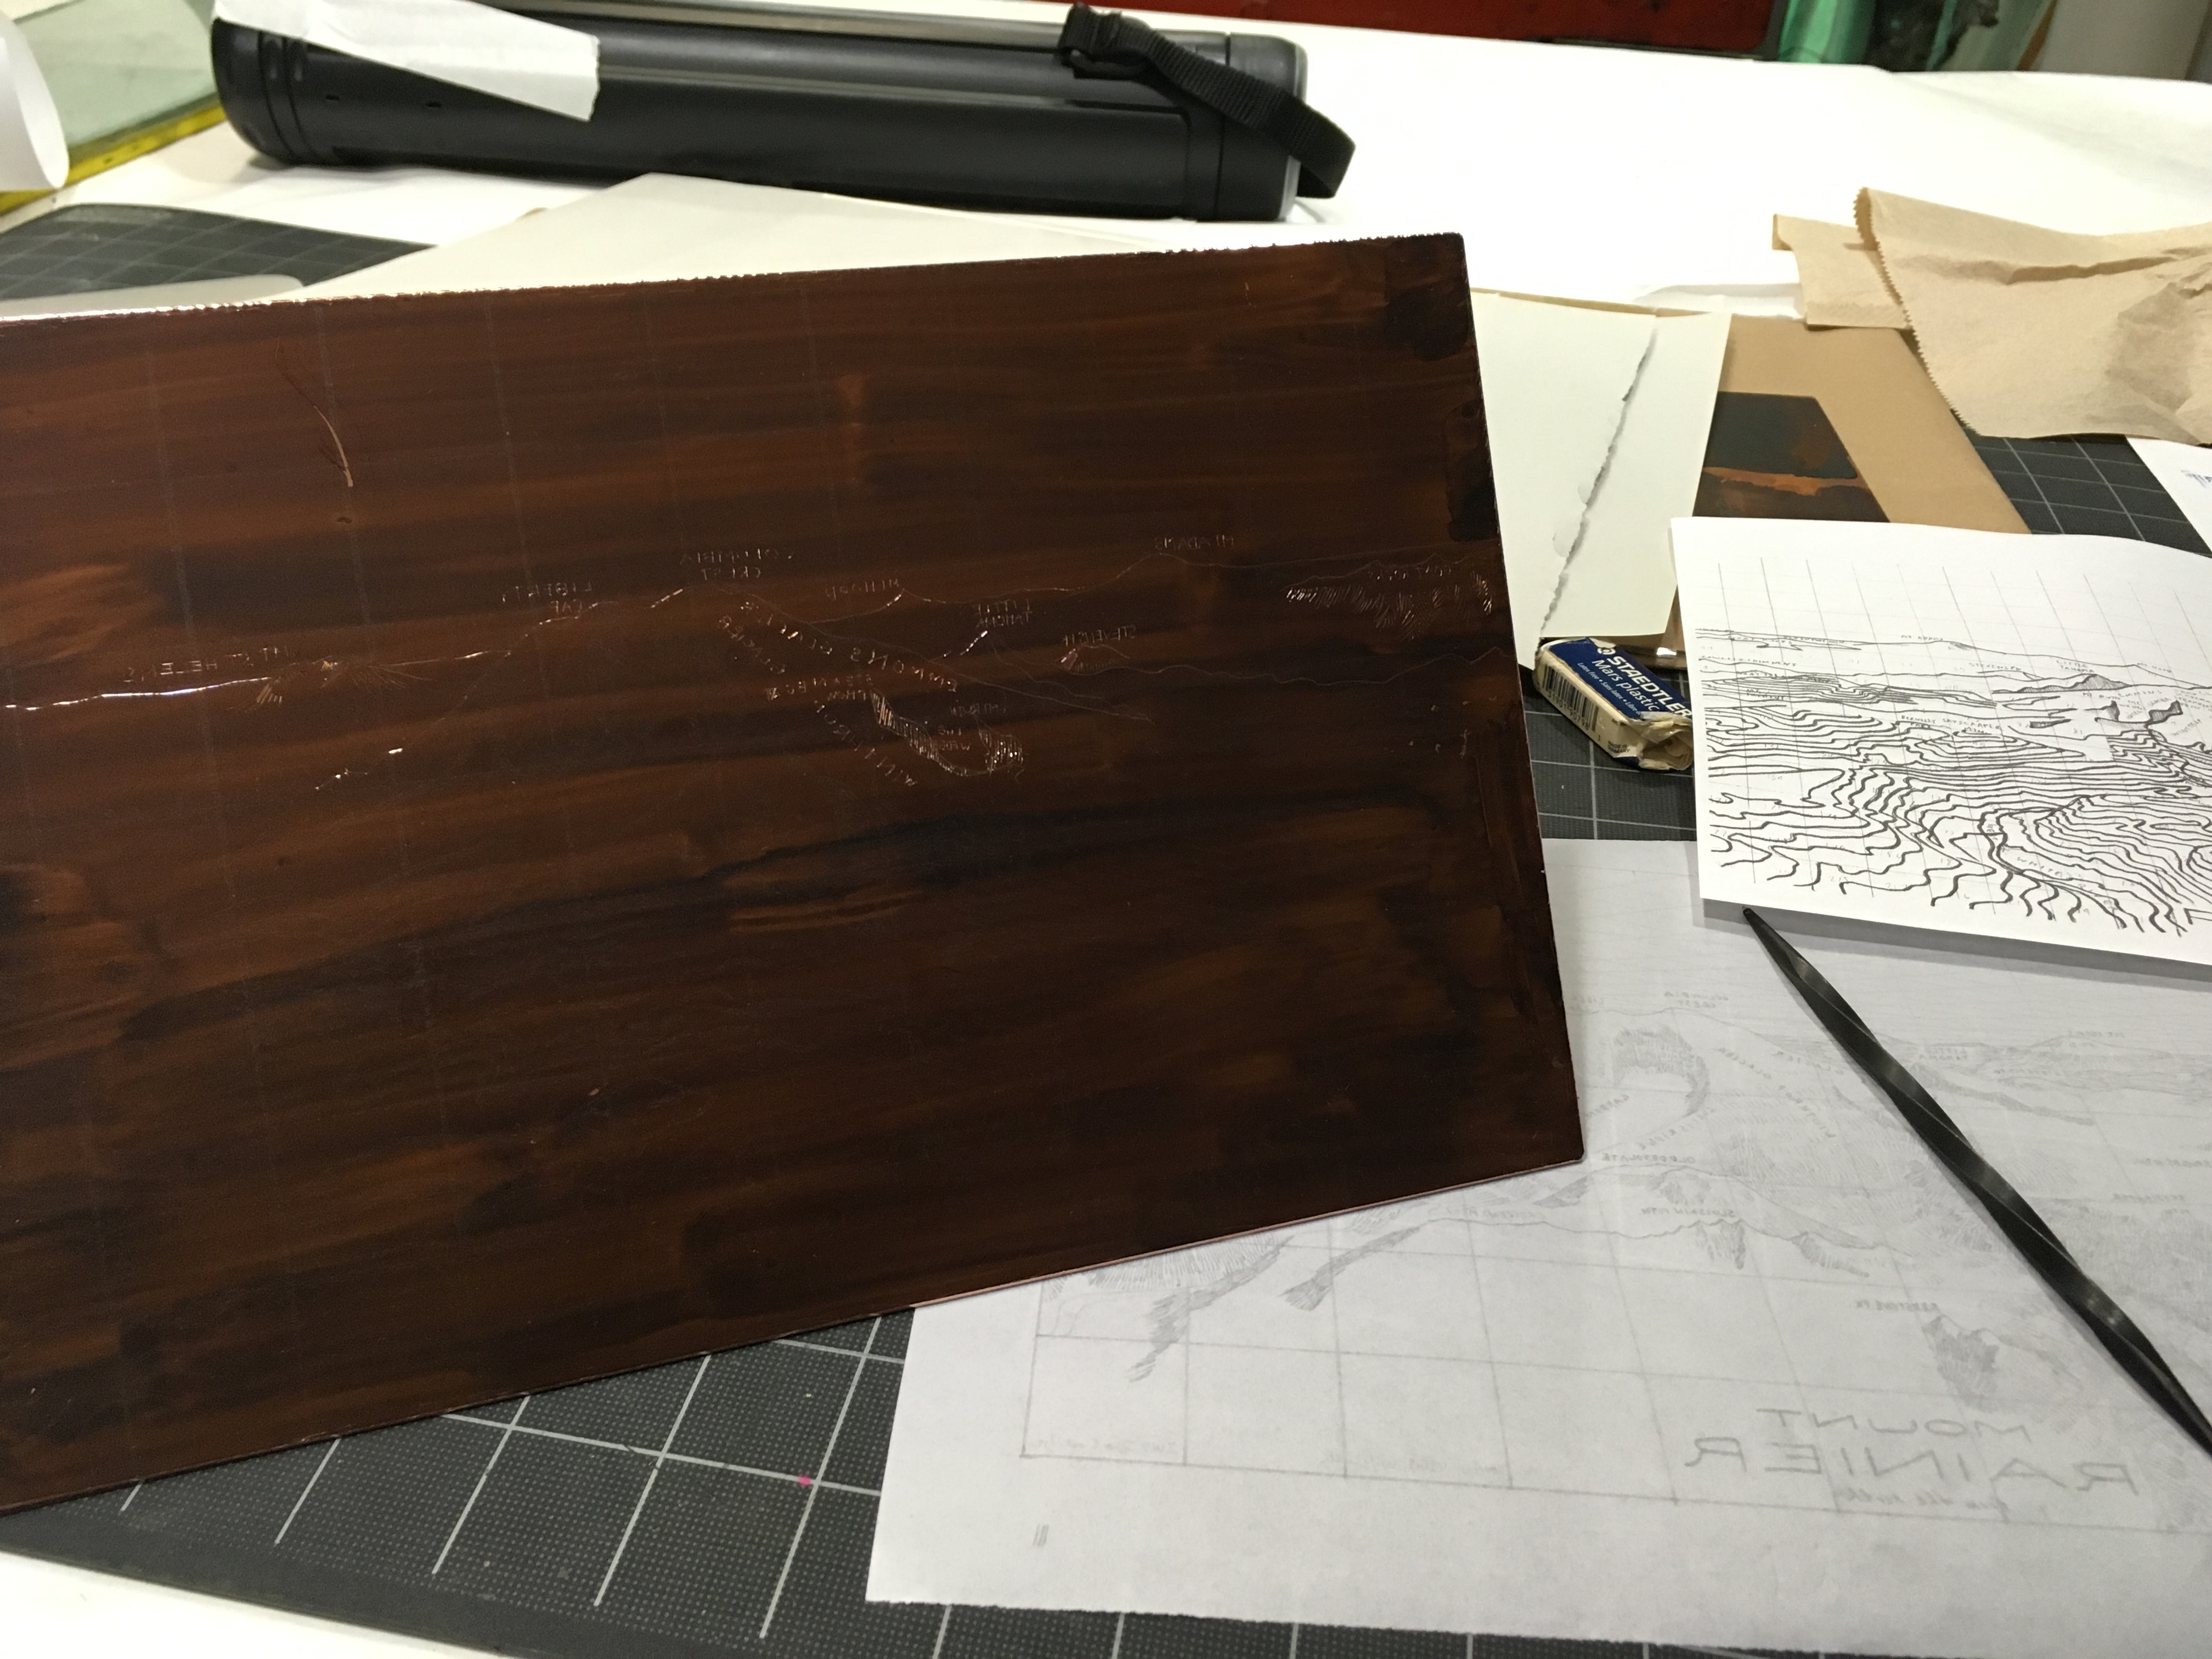 drawing the design on the grounded copper plate